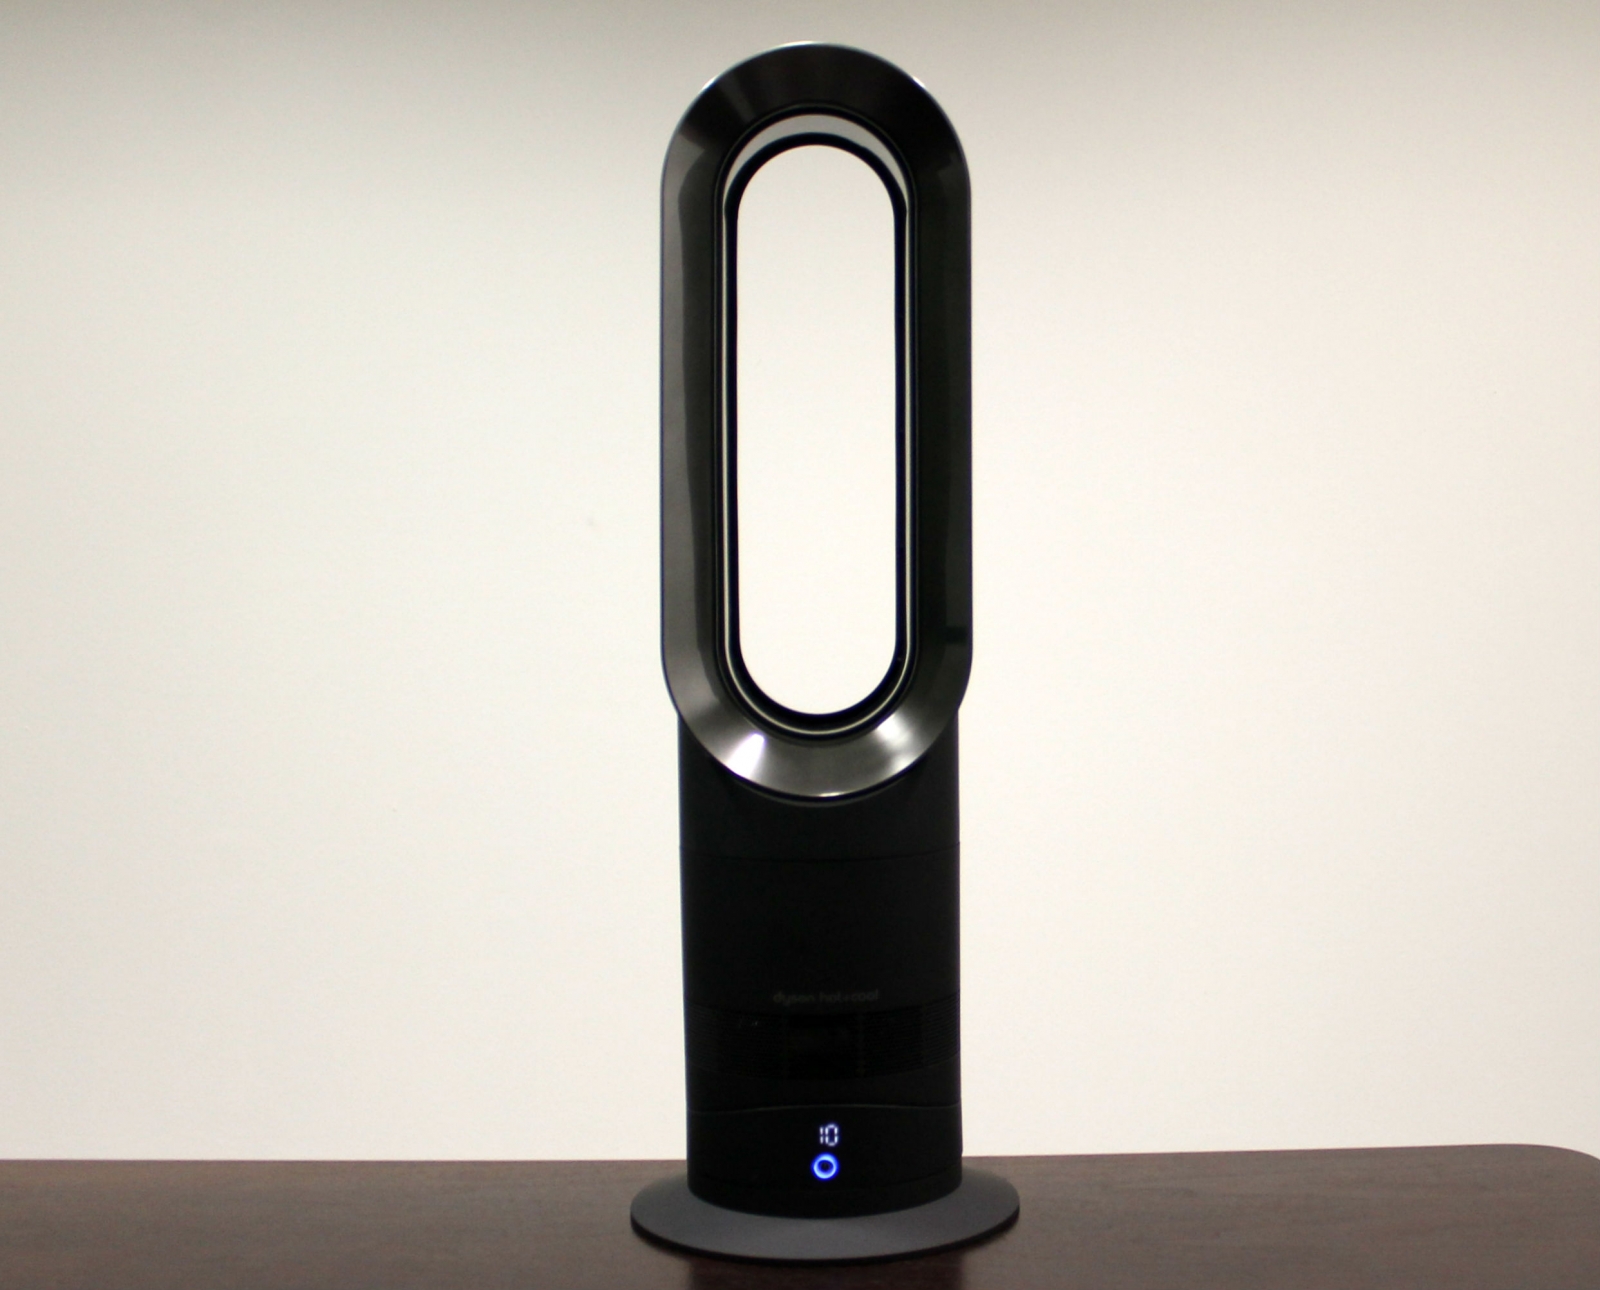 Dyson Hot + Cool Jet Focus review: A direct solution to home heating